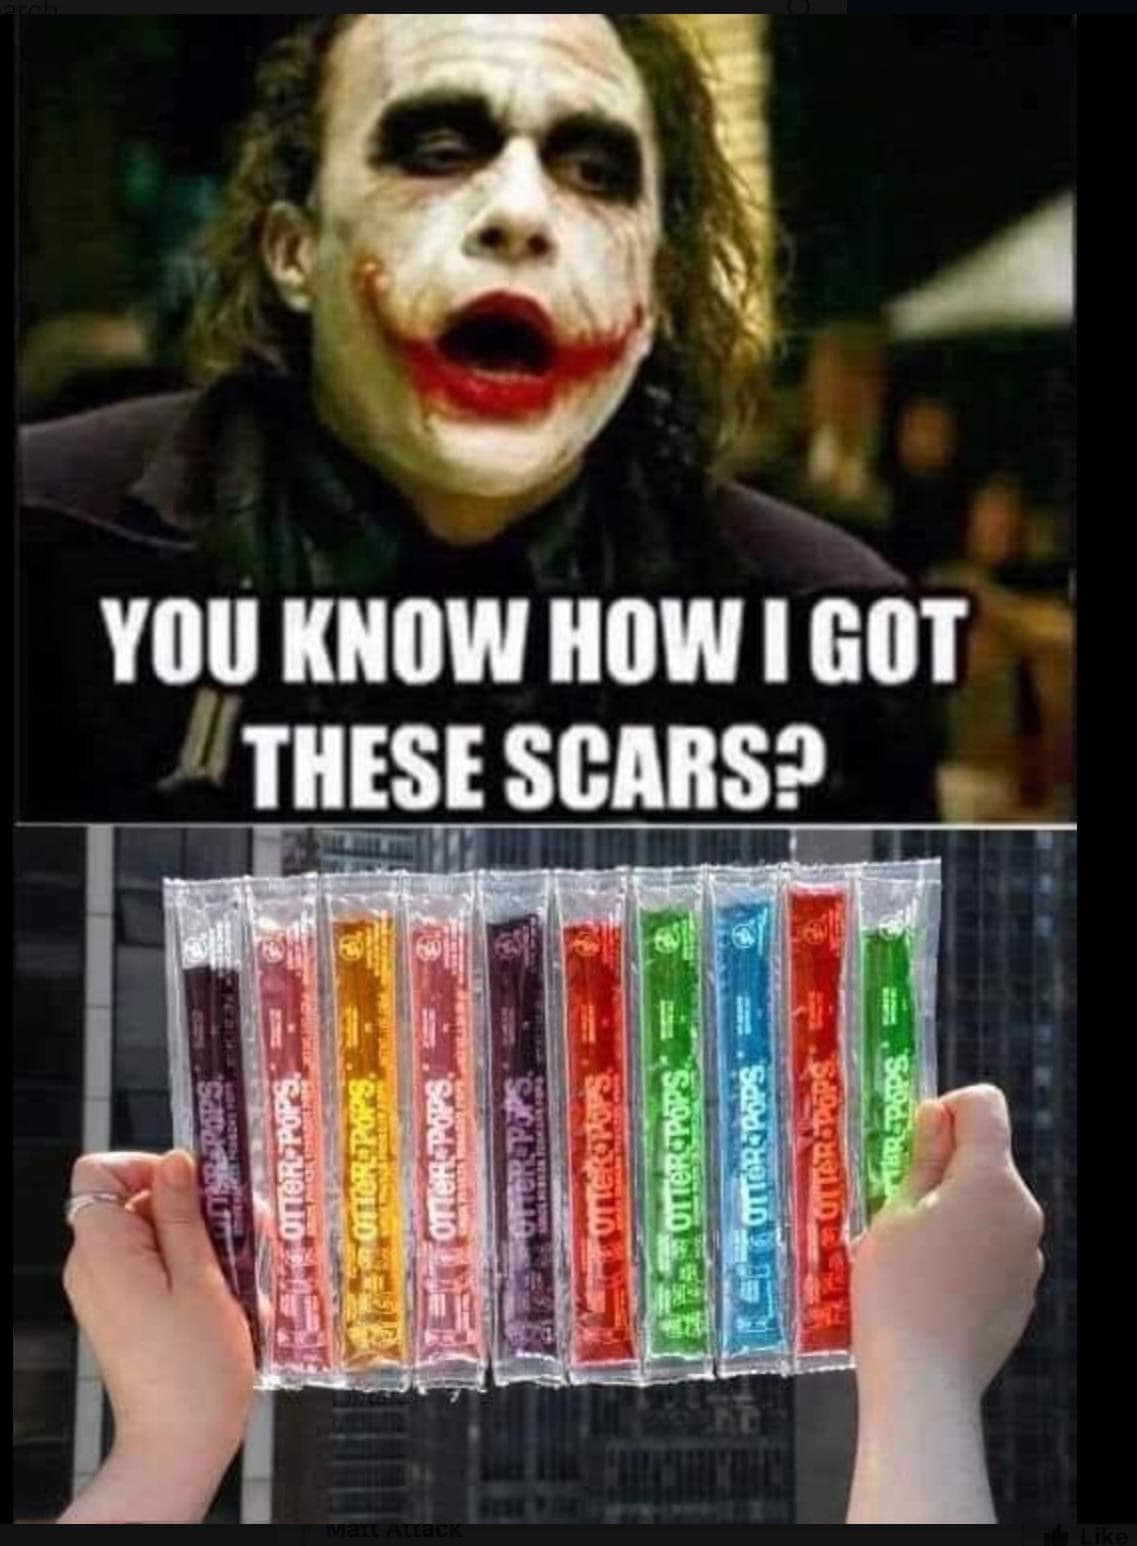 relatable memes - wanna know how i got these scars popsicle - Ottor Poe Metacr These Scars? You Know How I Got Unter outeR Pops Ultor Pops Uttar Tops R. Pops.